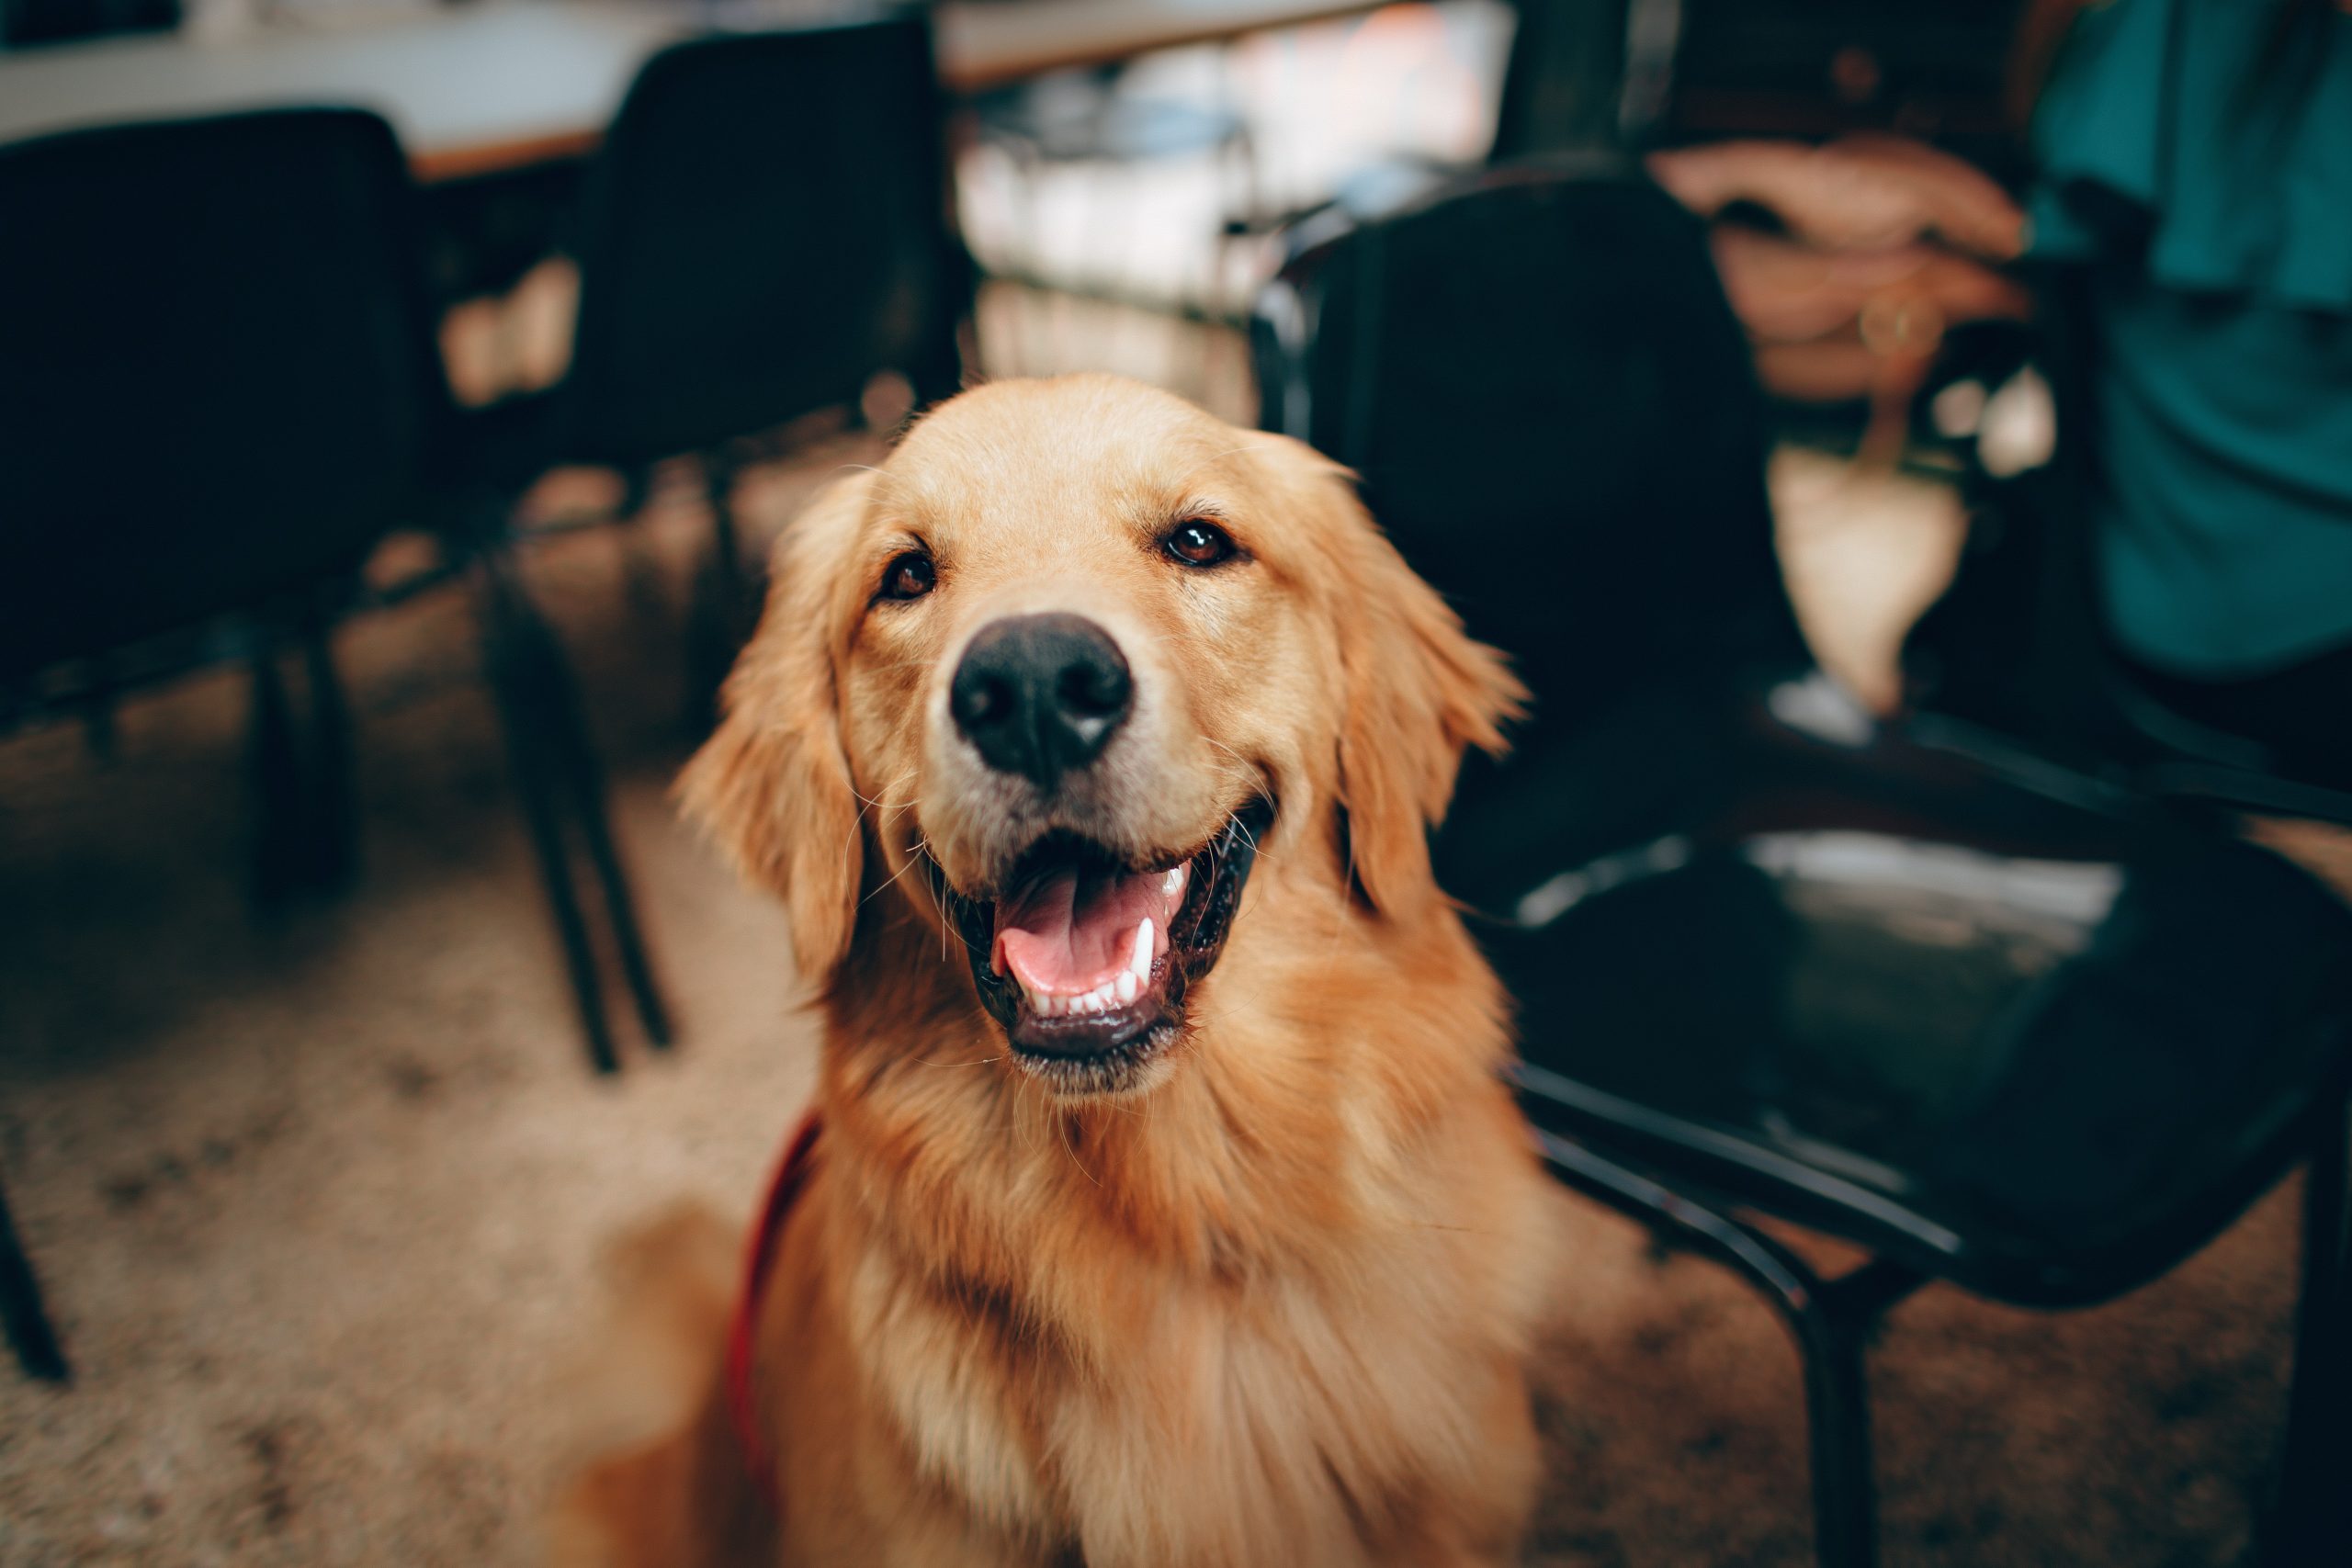 Golden Retriever sitting down smiling at a camera